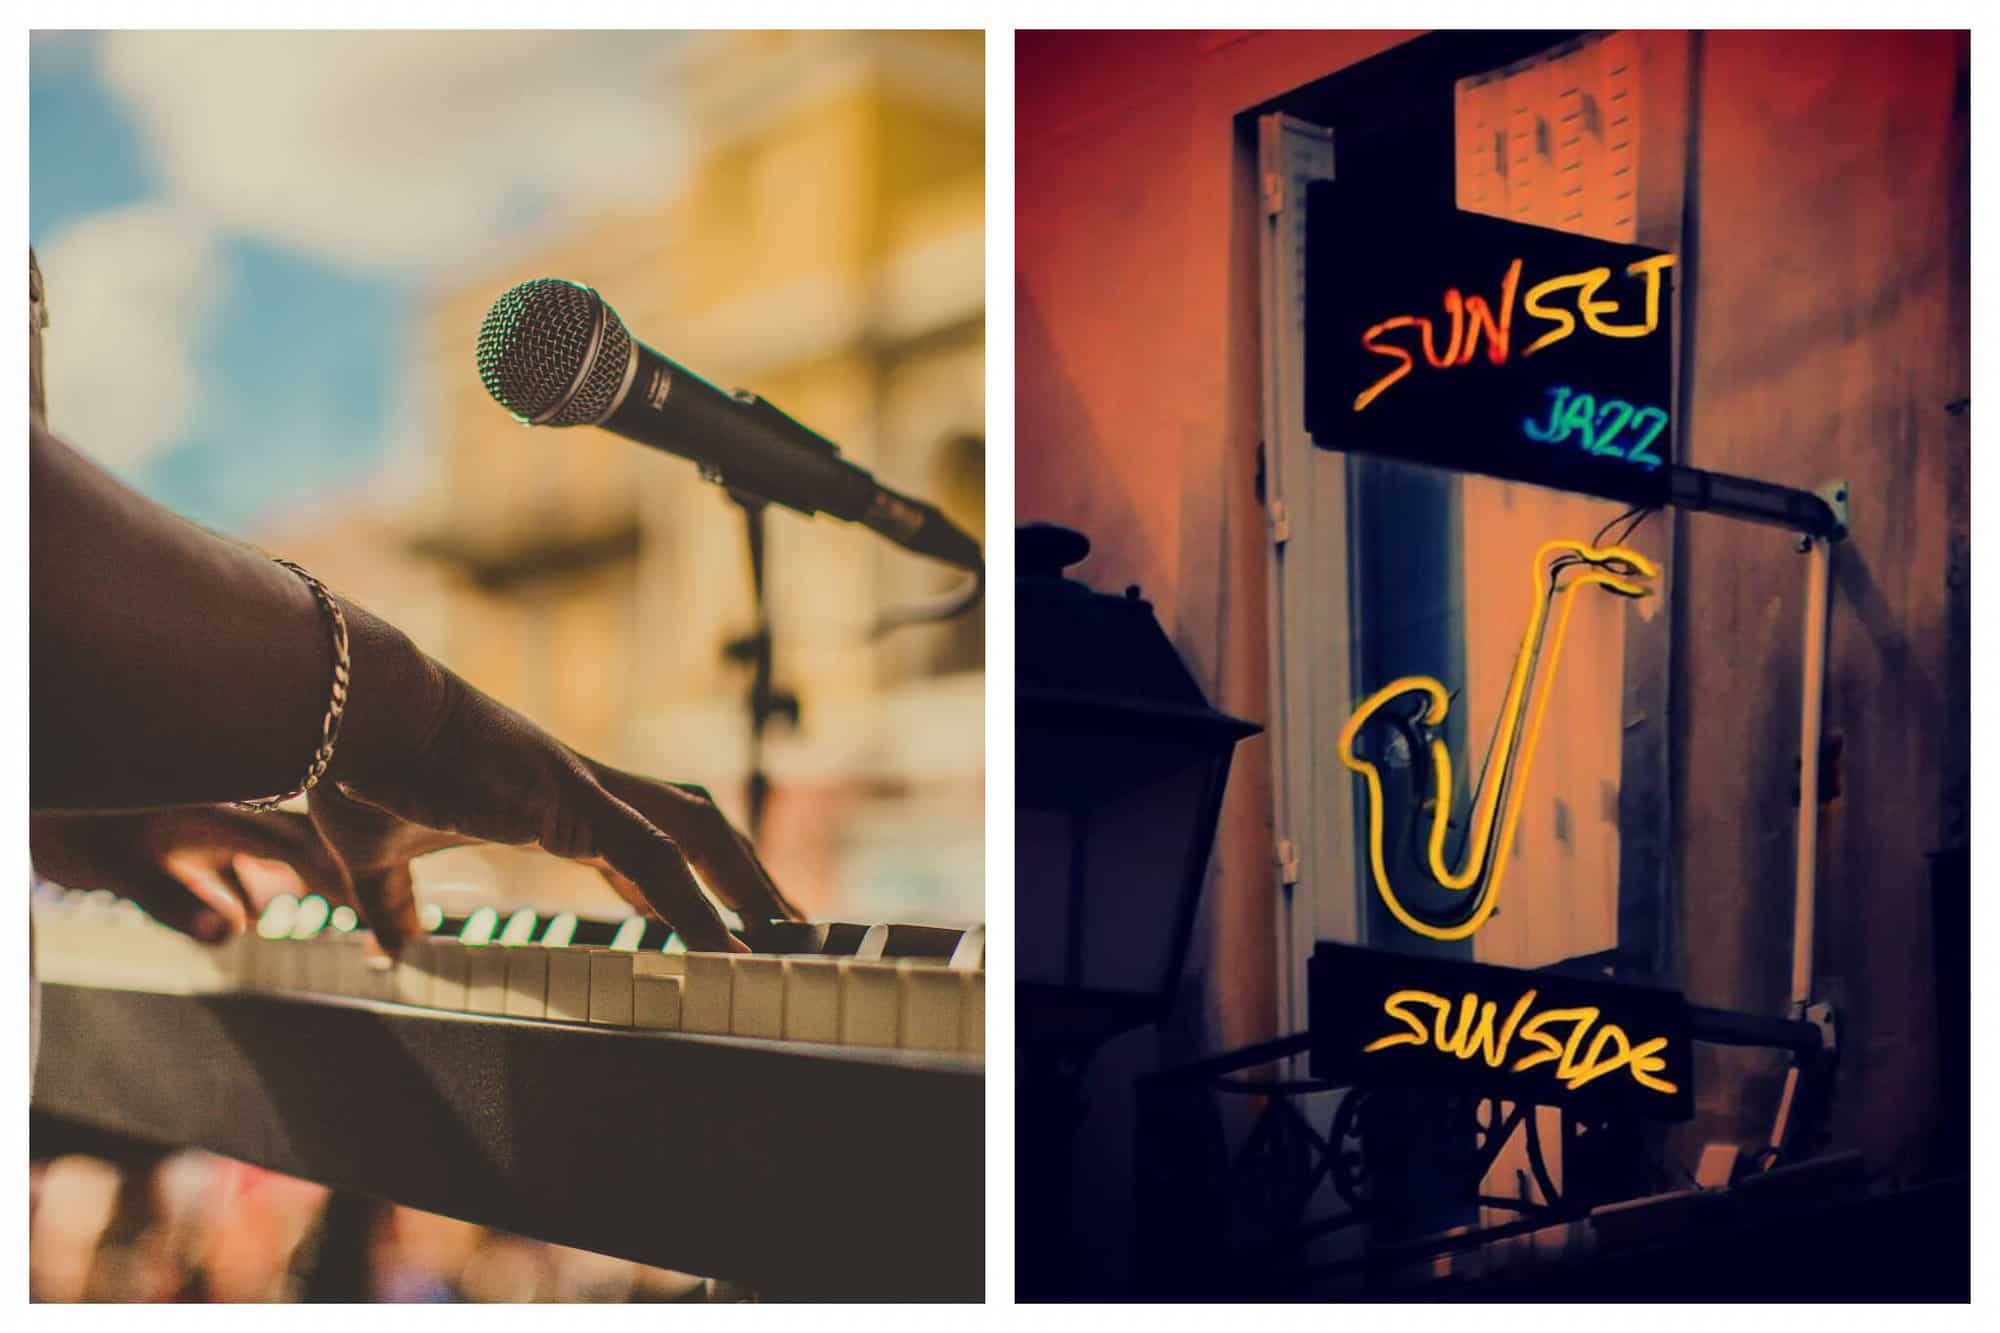 (Left) A person plays the keyboards and a microphone stands in front of them. (Right) A neon yellow sign for a Jazz club is placed on the side of a building.